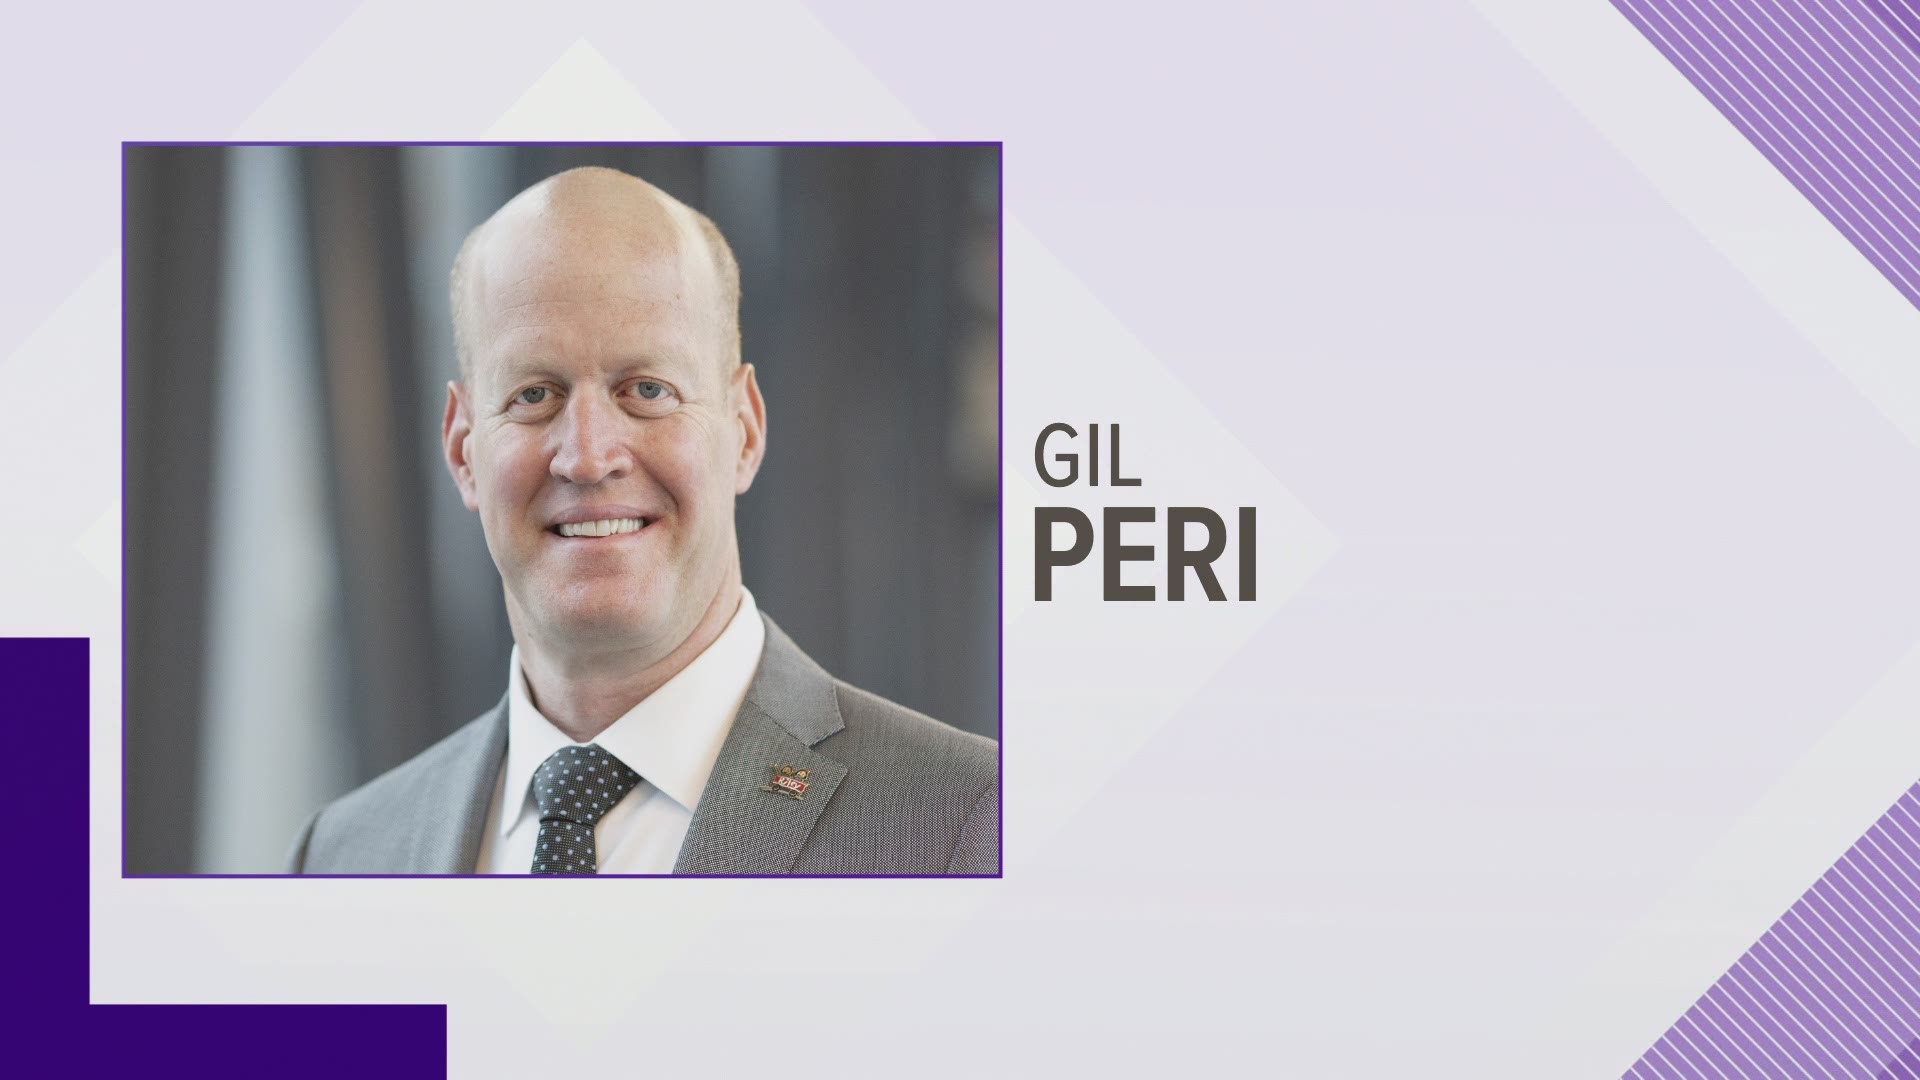 Gil Peri previously served in a similar role at a Connecticut hospital.